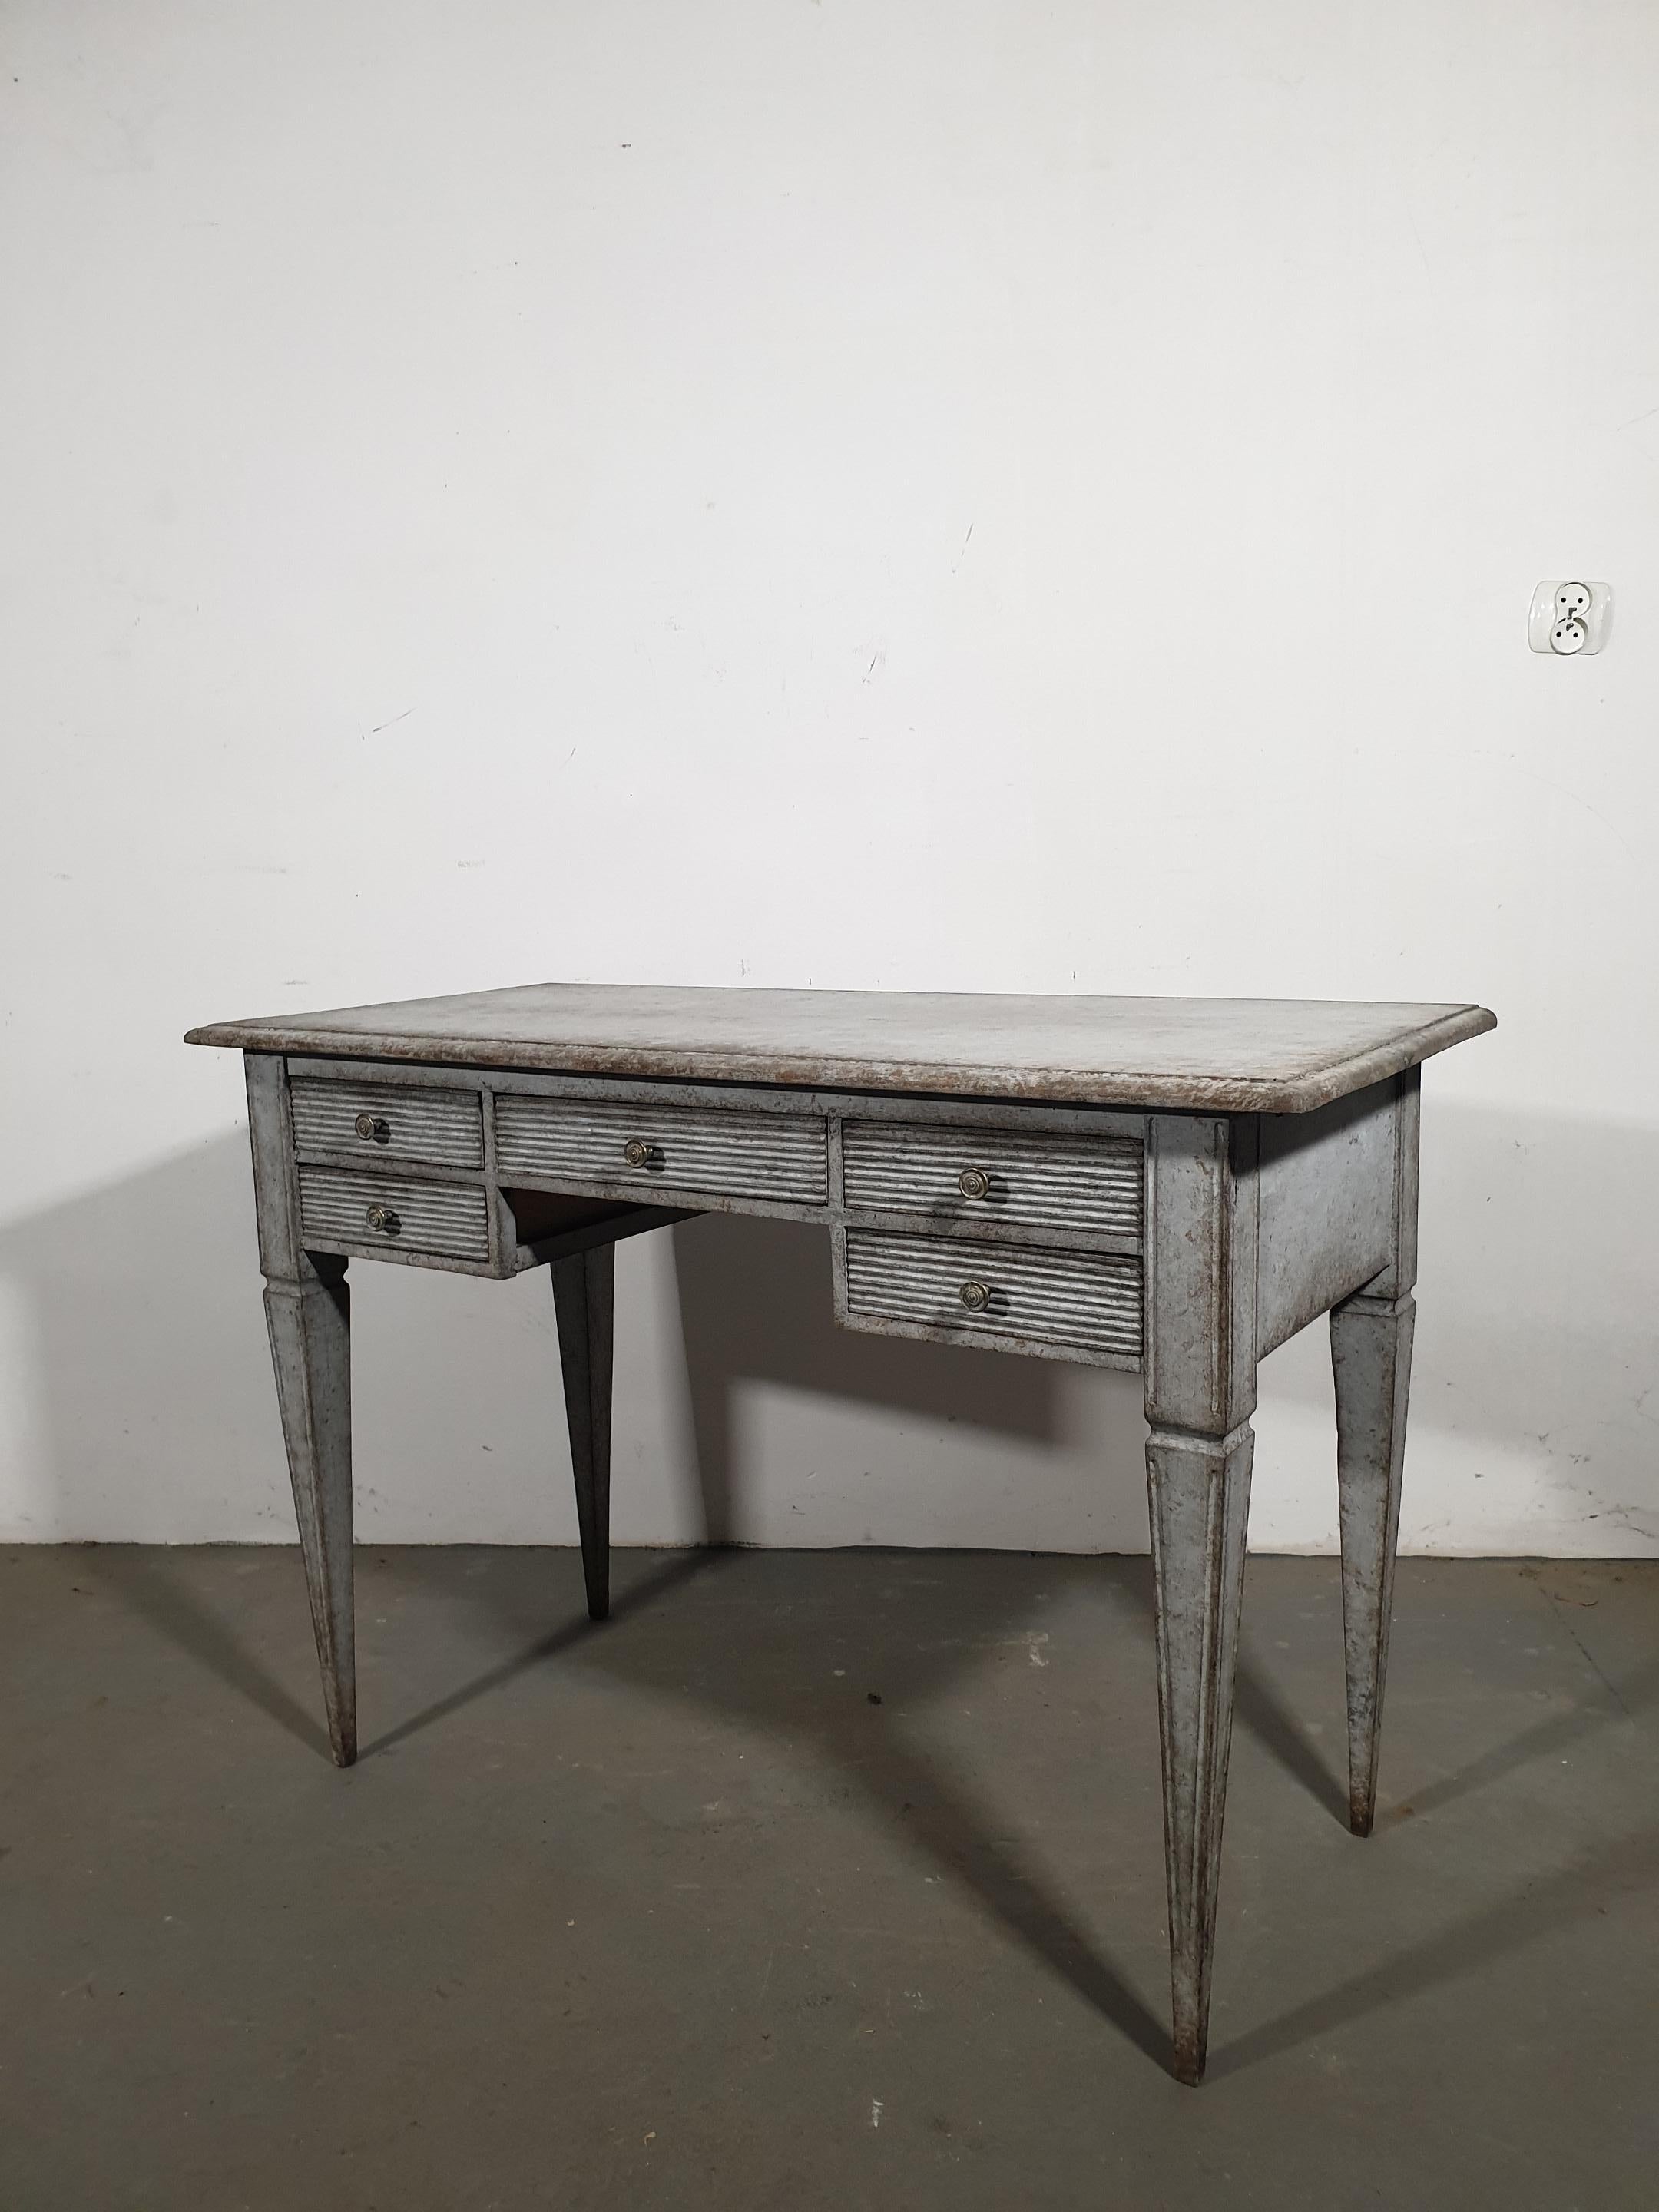 Gustavian Style 1870s Swedish Gray Painted Desk, Fluted Drawers and Tapered Legs In Good Condition For Sale In Atlanta, GA